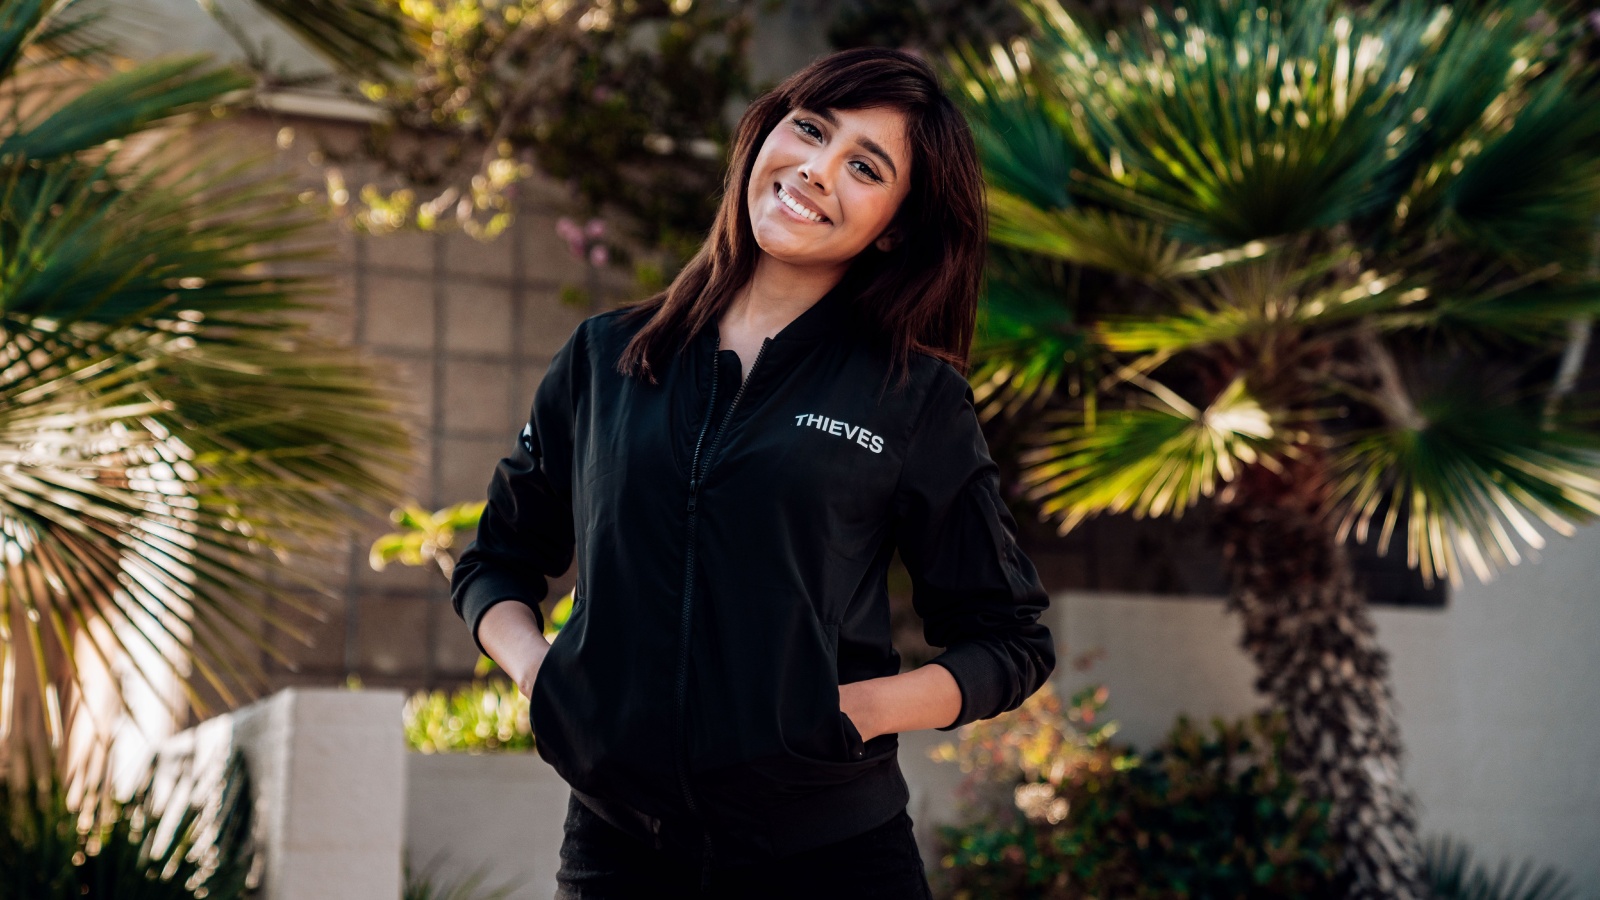 Neekolul spoke with us about the rumors surrounding her exit from 100  Thieves earlier this year and what life is like after her meteoric…